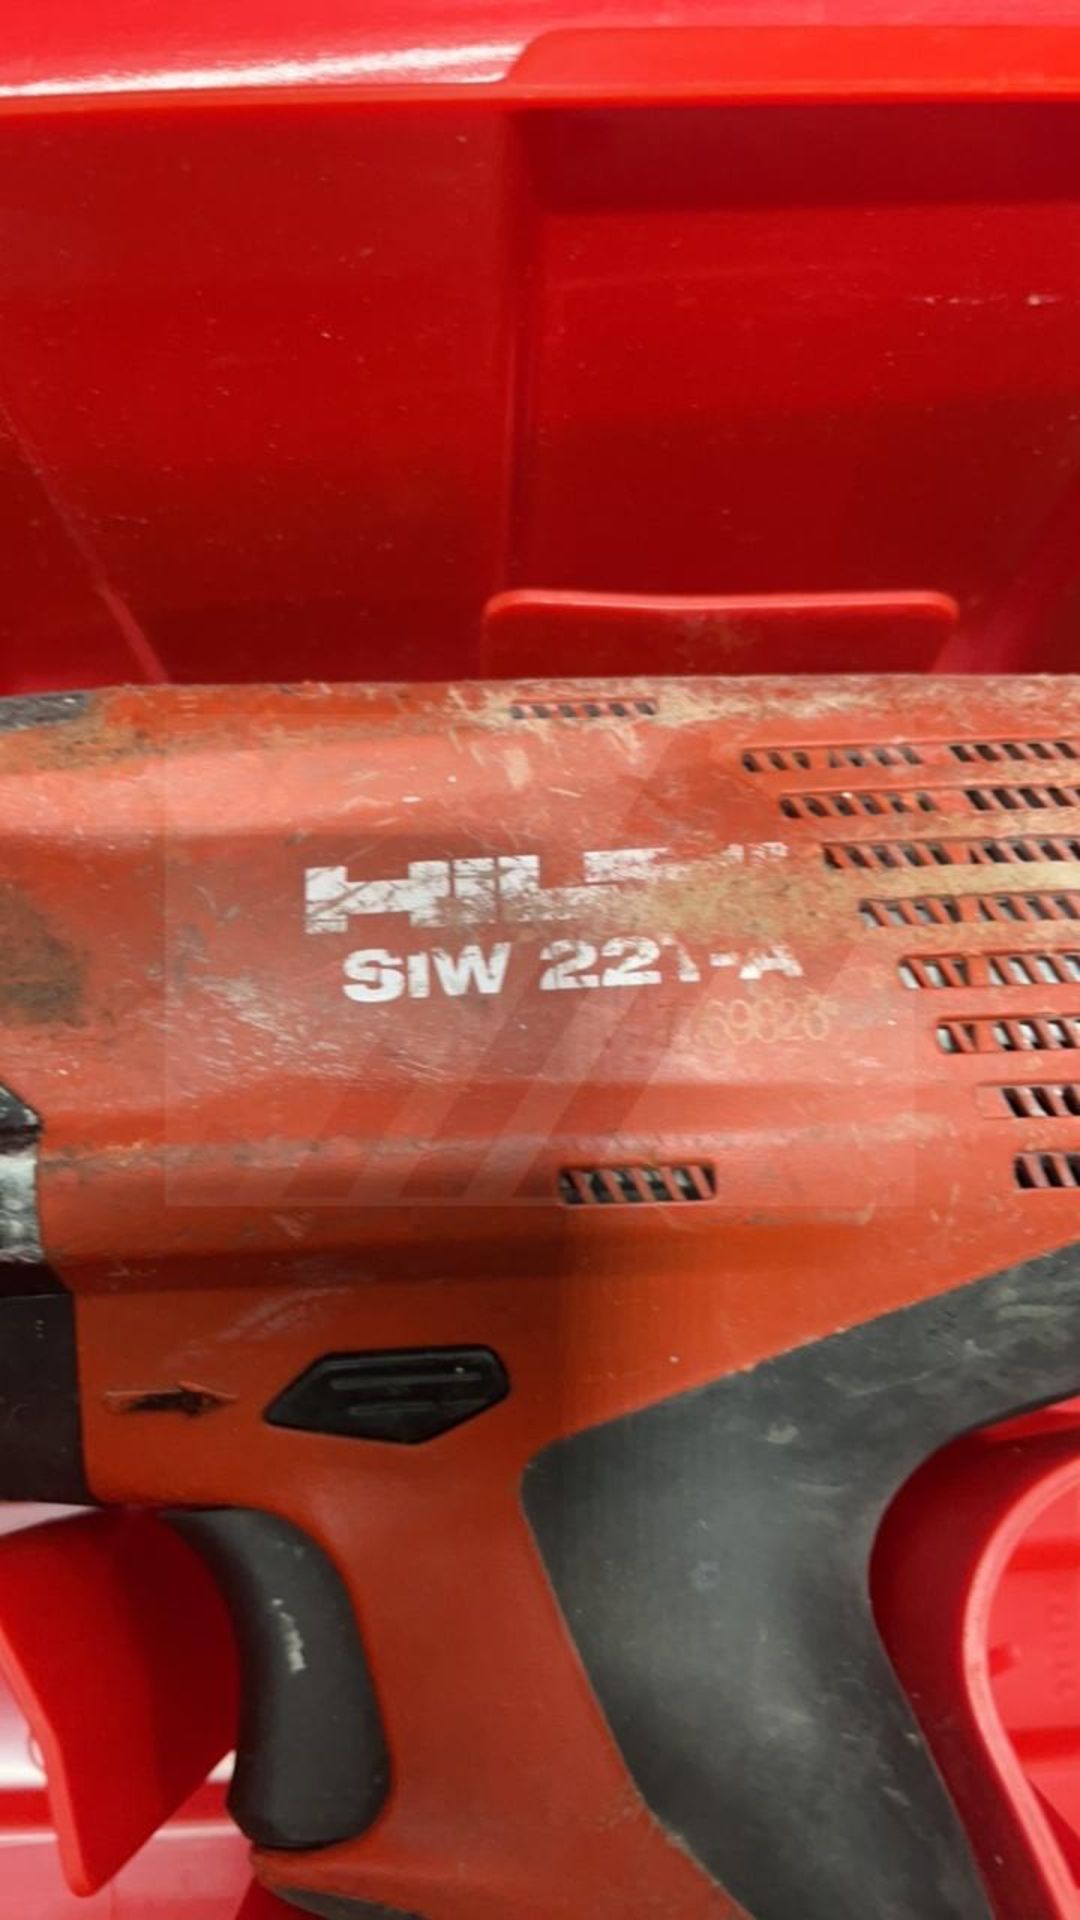 HILTI SIW 22T-A 1/2" Cordless Impact Wrench - Image 3 of 5